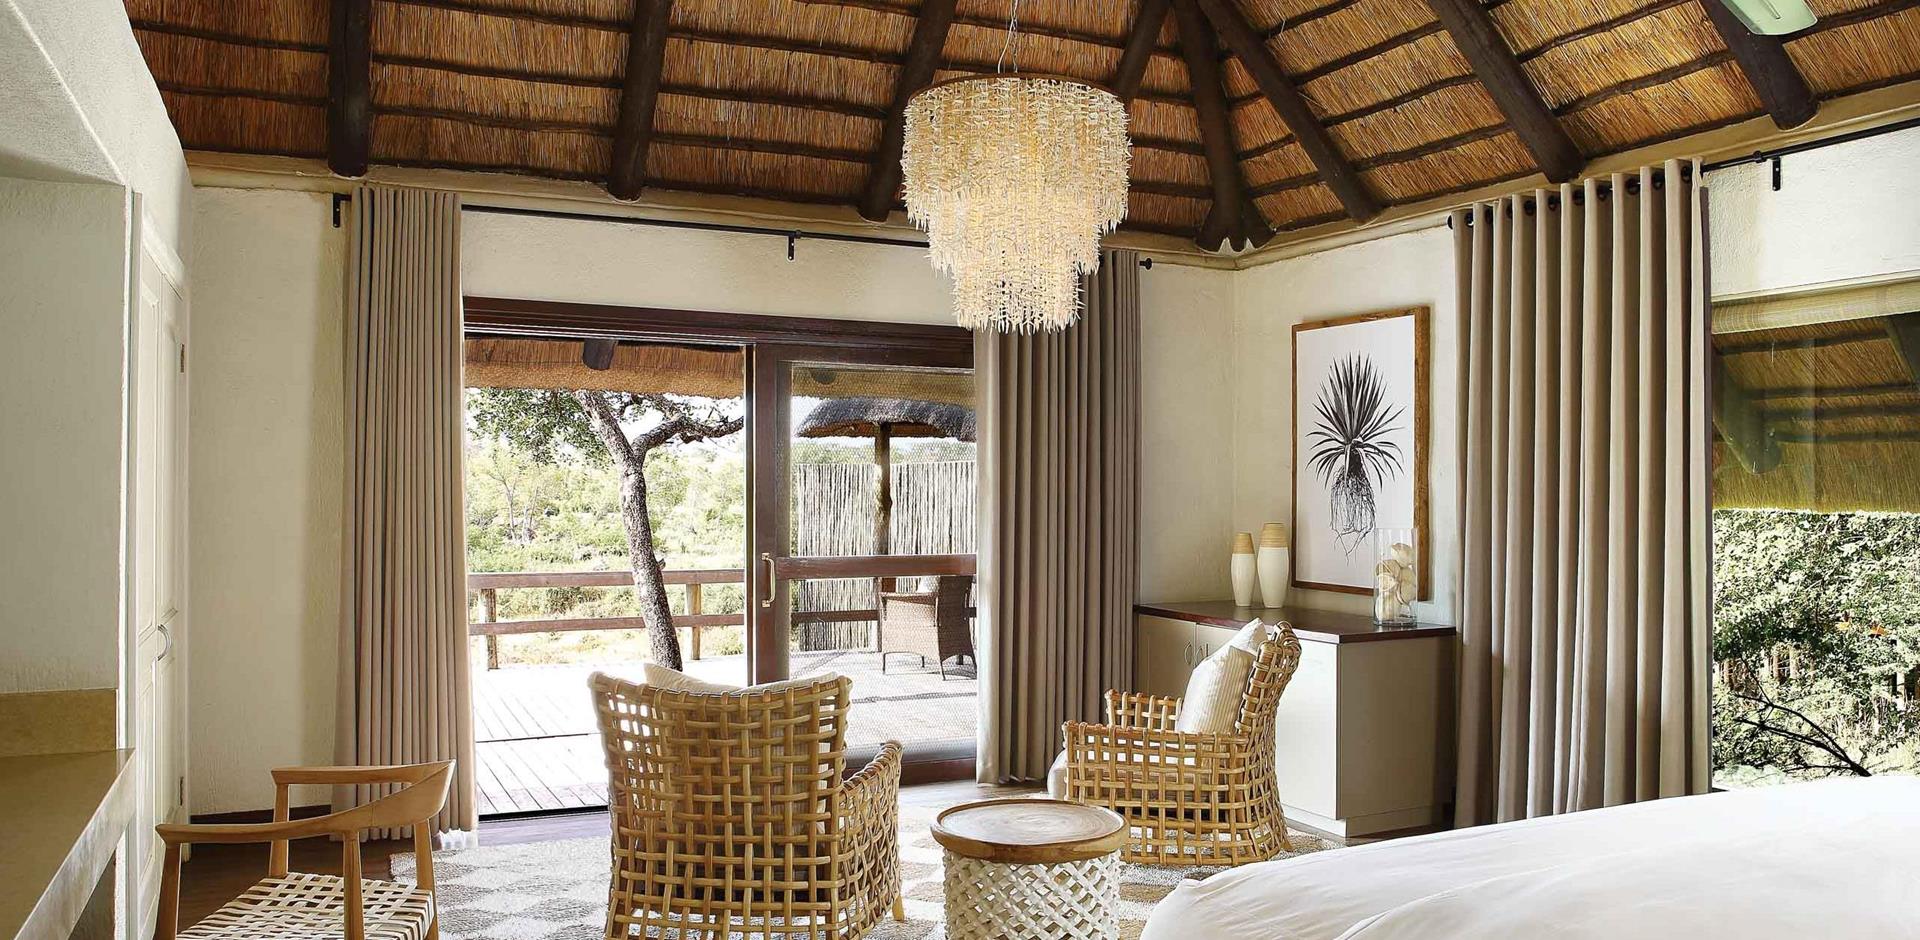 Bedroom, Londolozi Founders, South Africa, A&K